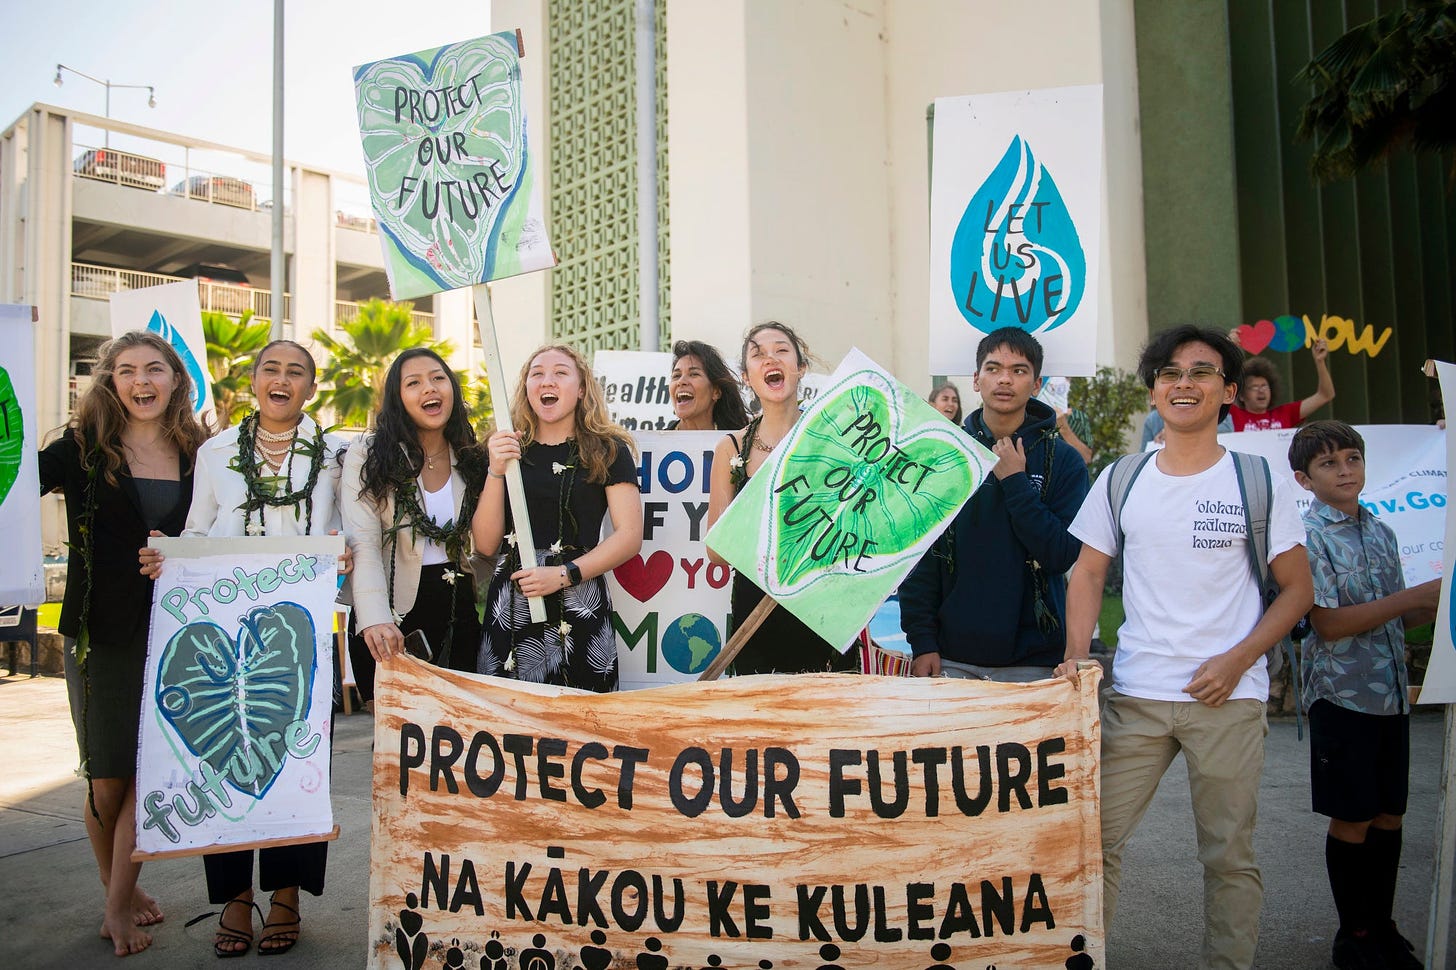 Eight teens are upbeat and excited during rallySeven or eight teenagers on a sidewalk outside an urban building holding signs with heart-shaped kalo leaves that read Protect Our Future and Let Us Live